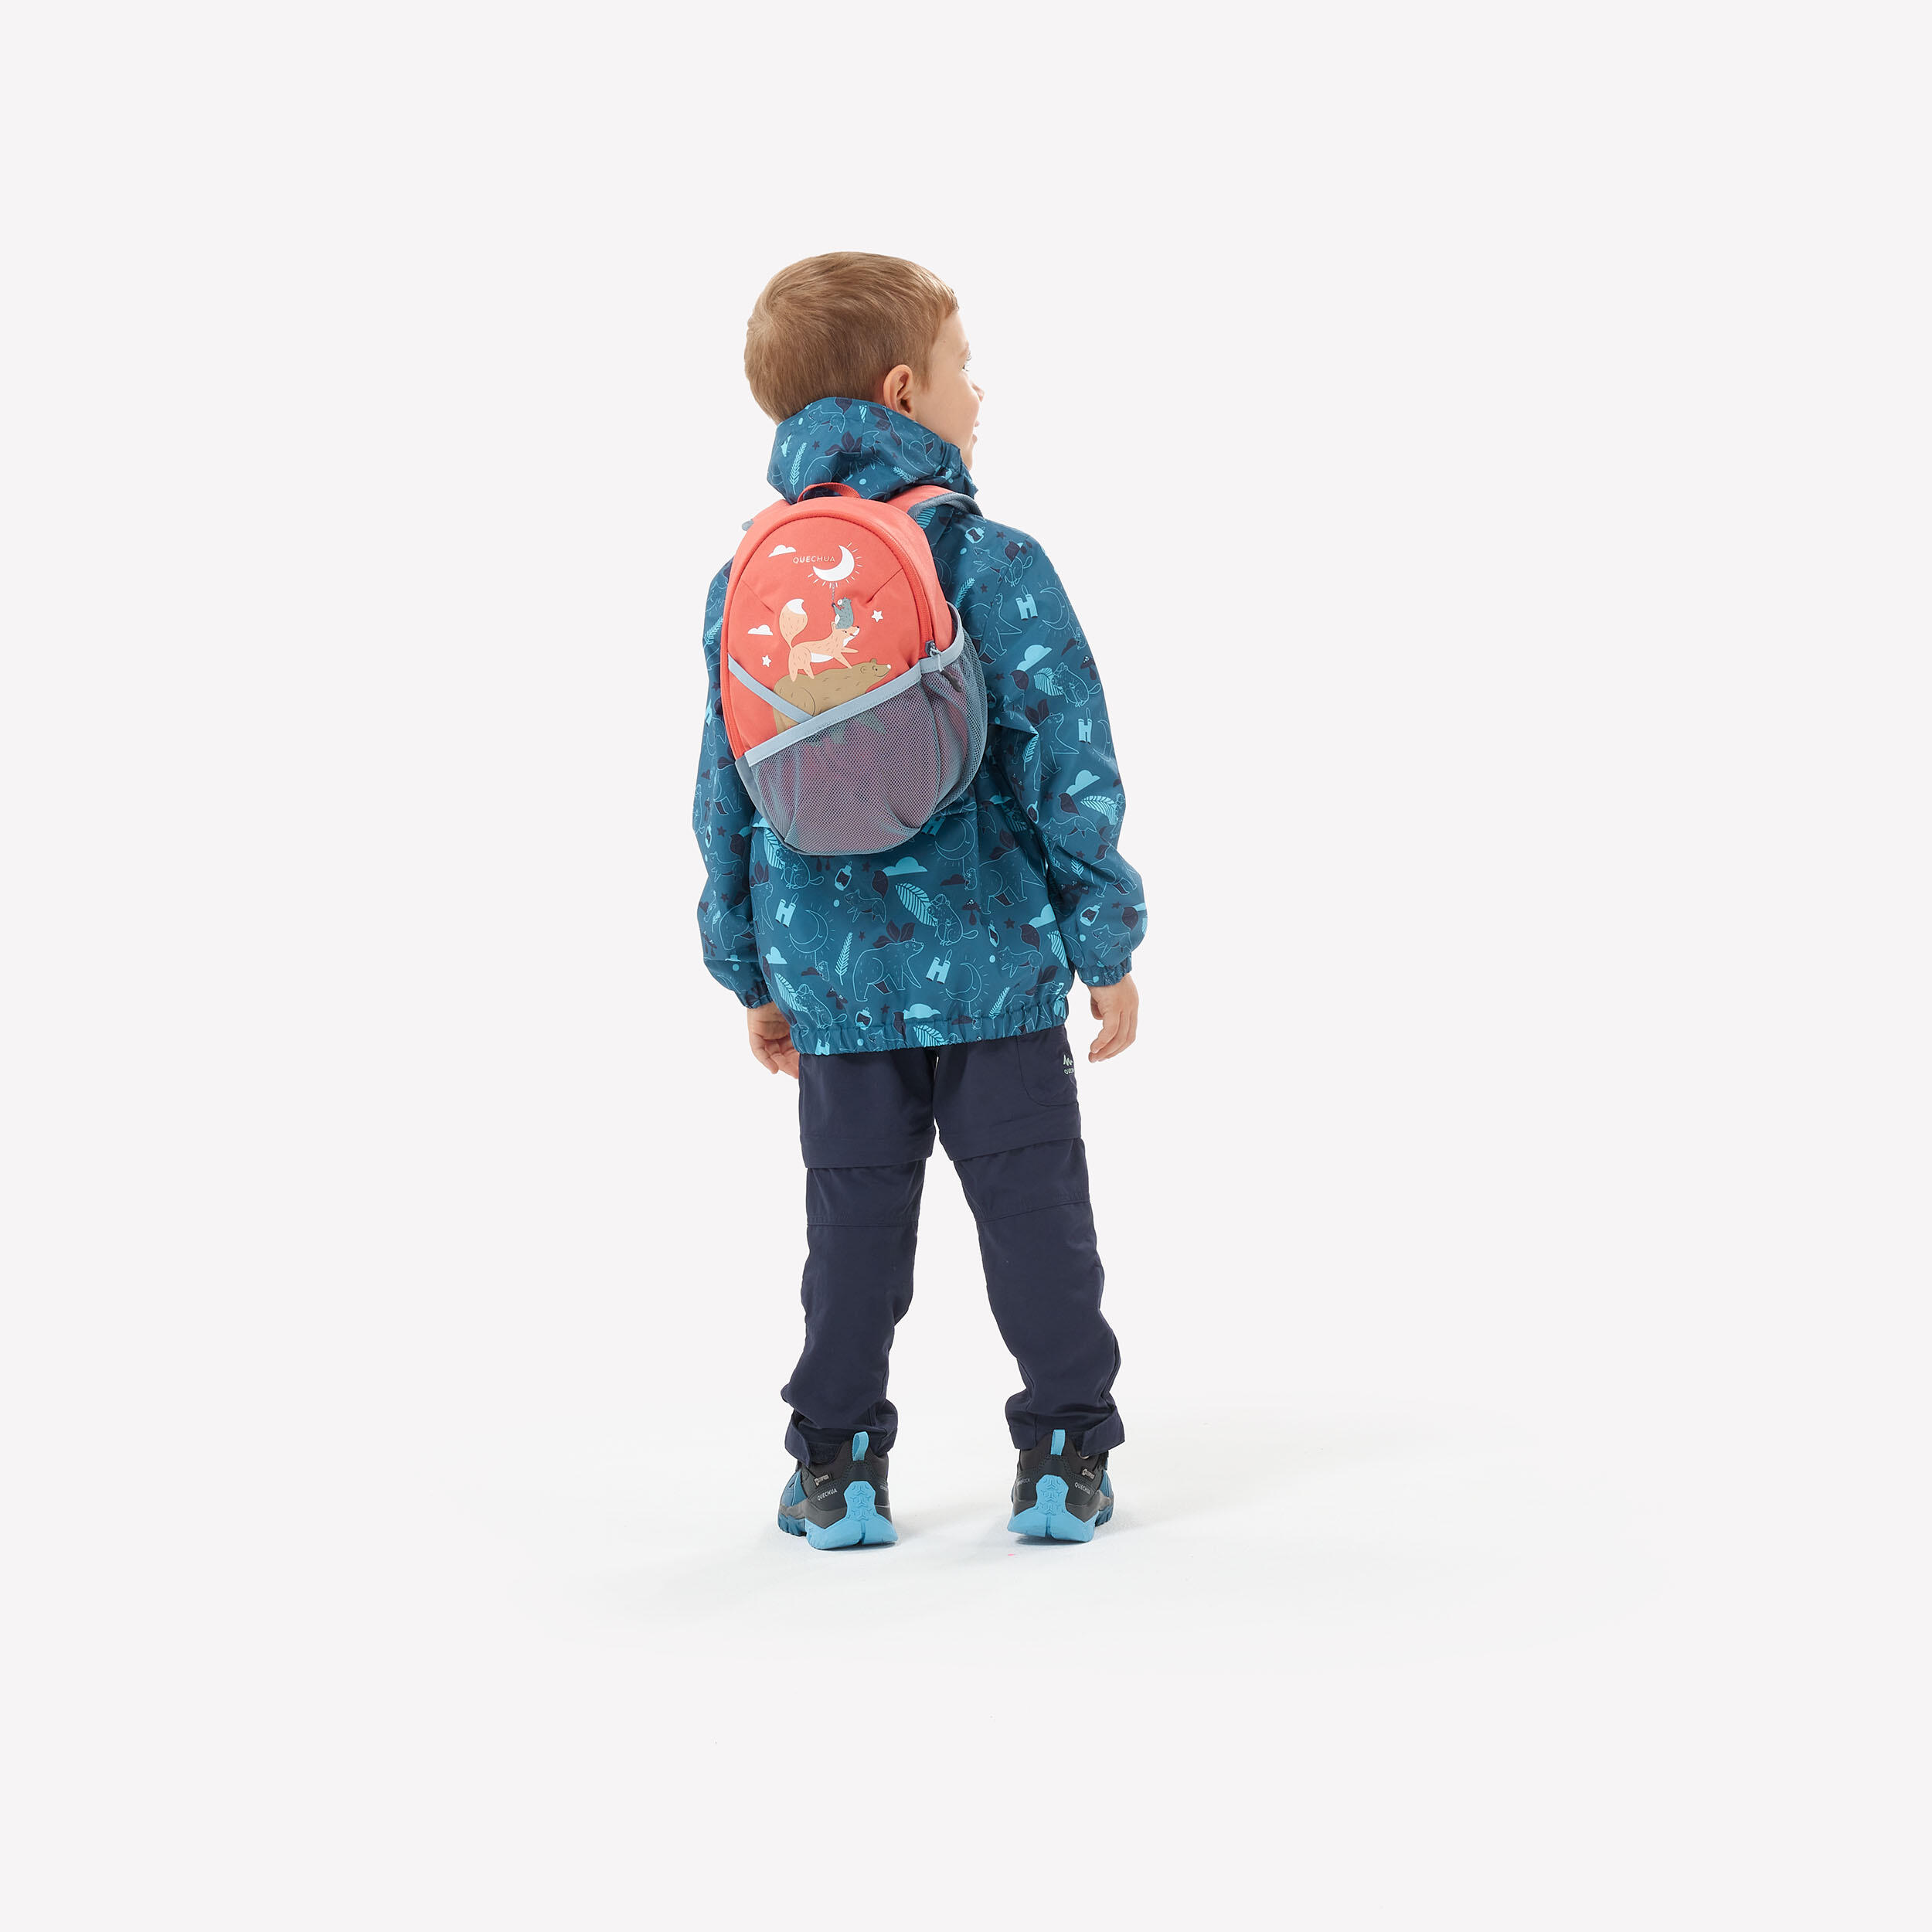 Kids' hiking small backpack 5L - MH100 8/8